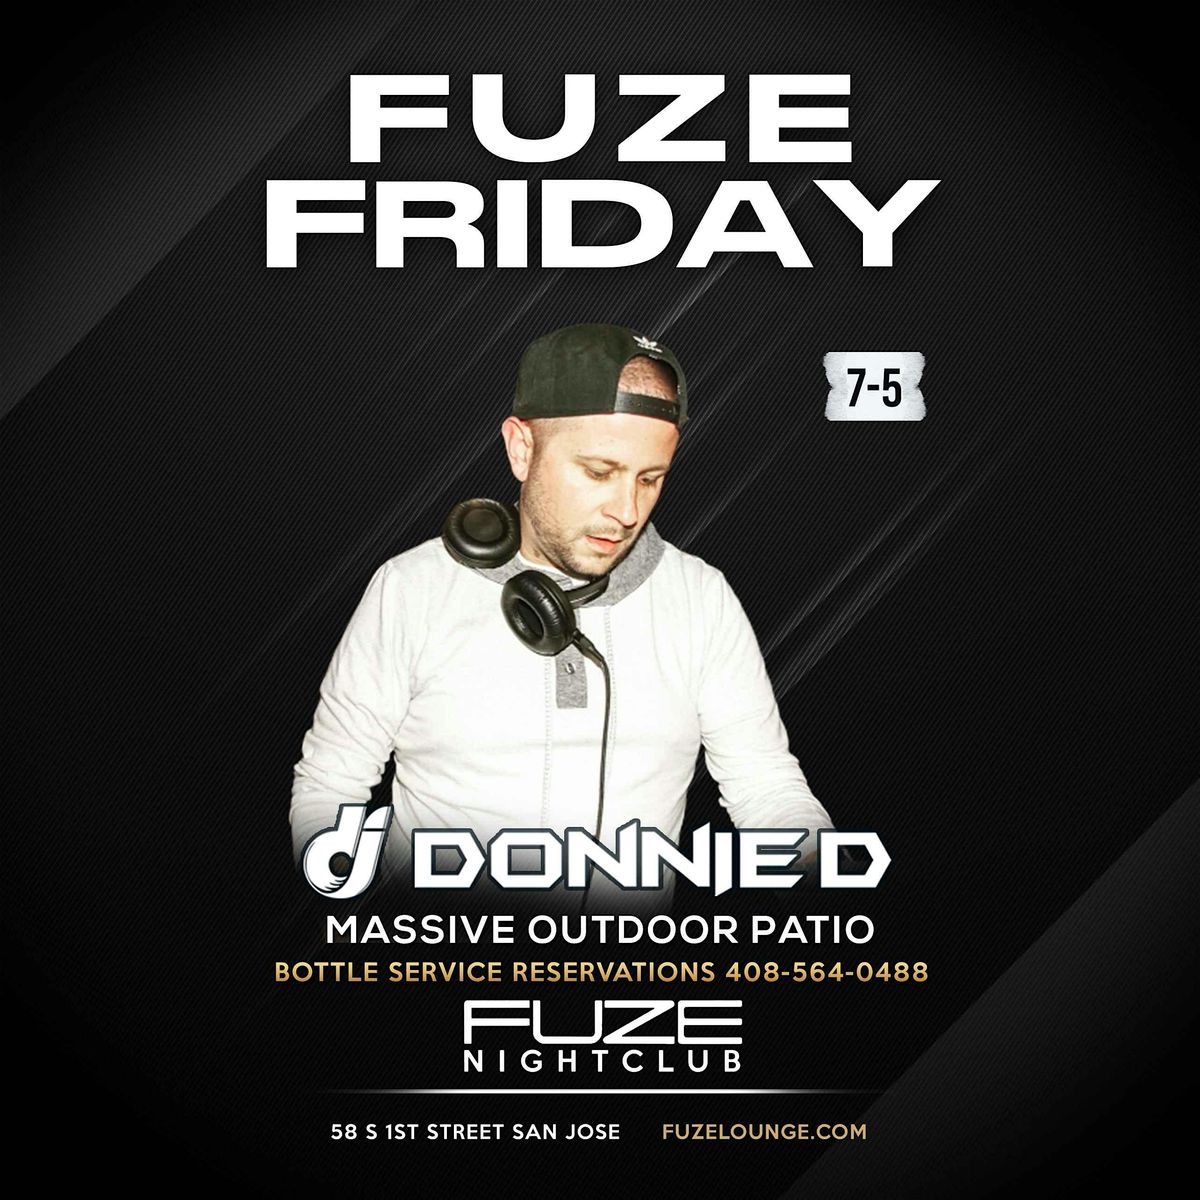 FUZE FRIDAYS  JULY 5TH DONNIE D